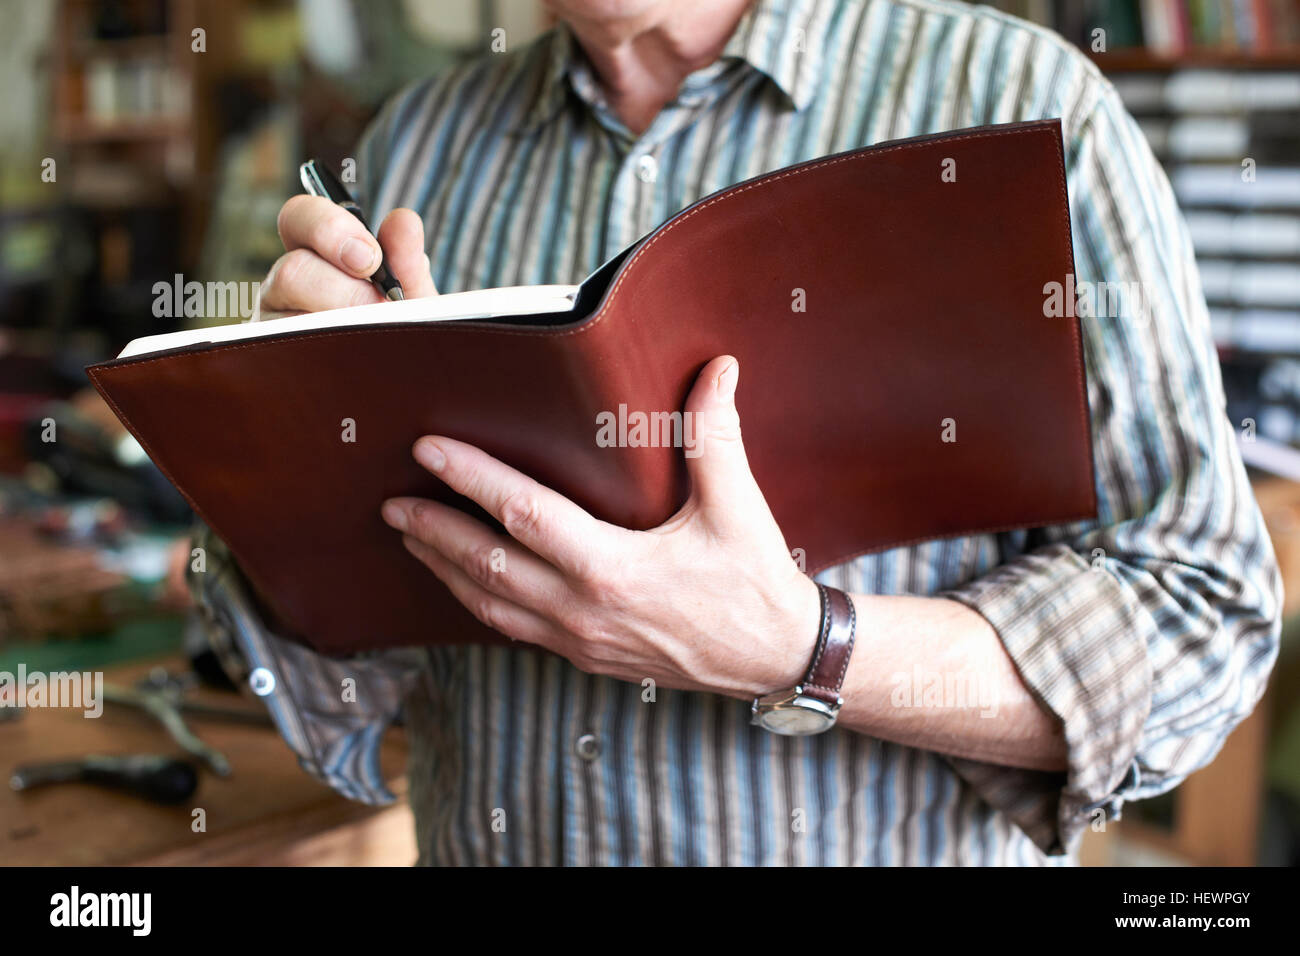 Man in leather workshop, writing in leather bound notebook, mid section, close-up Stock Photo